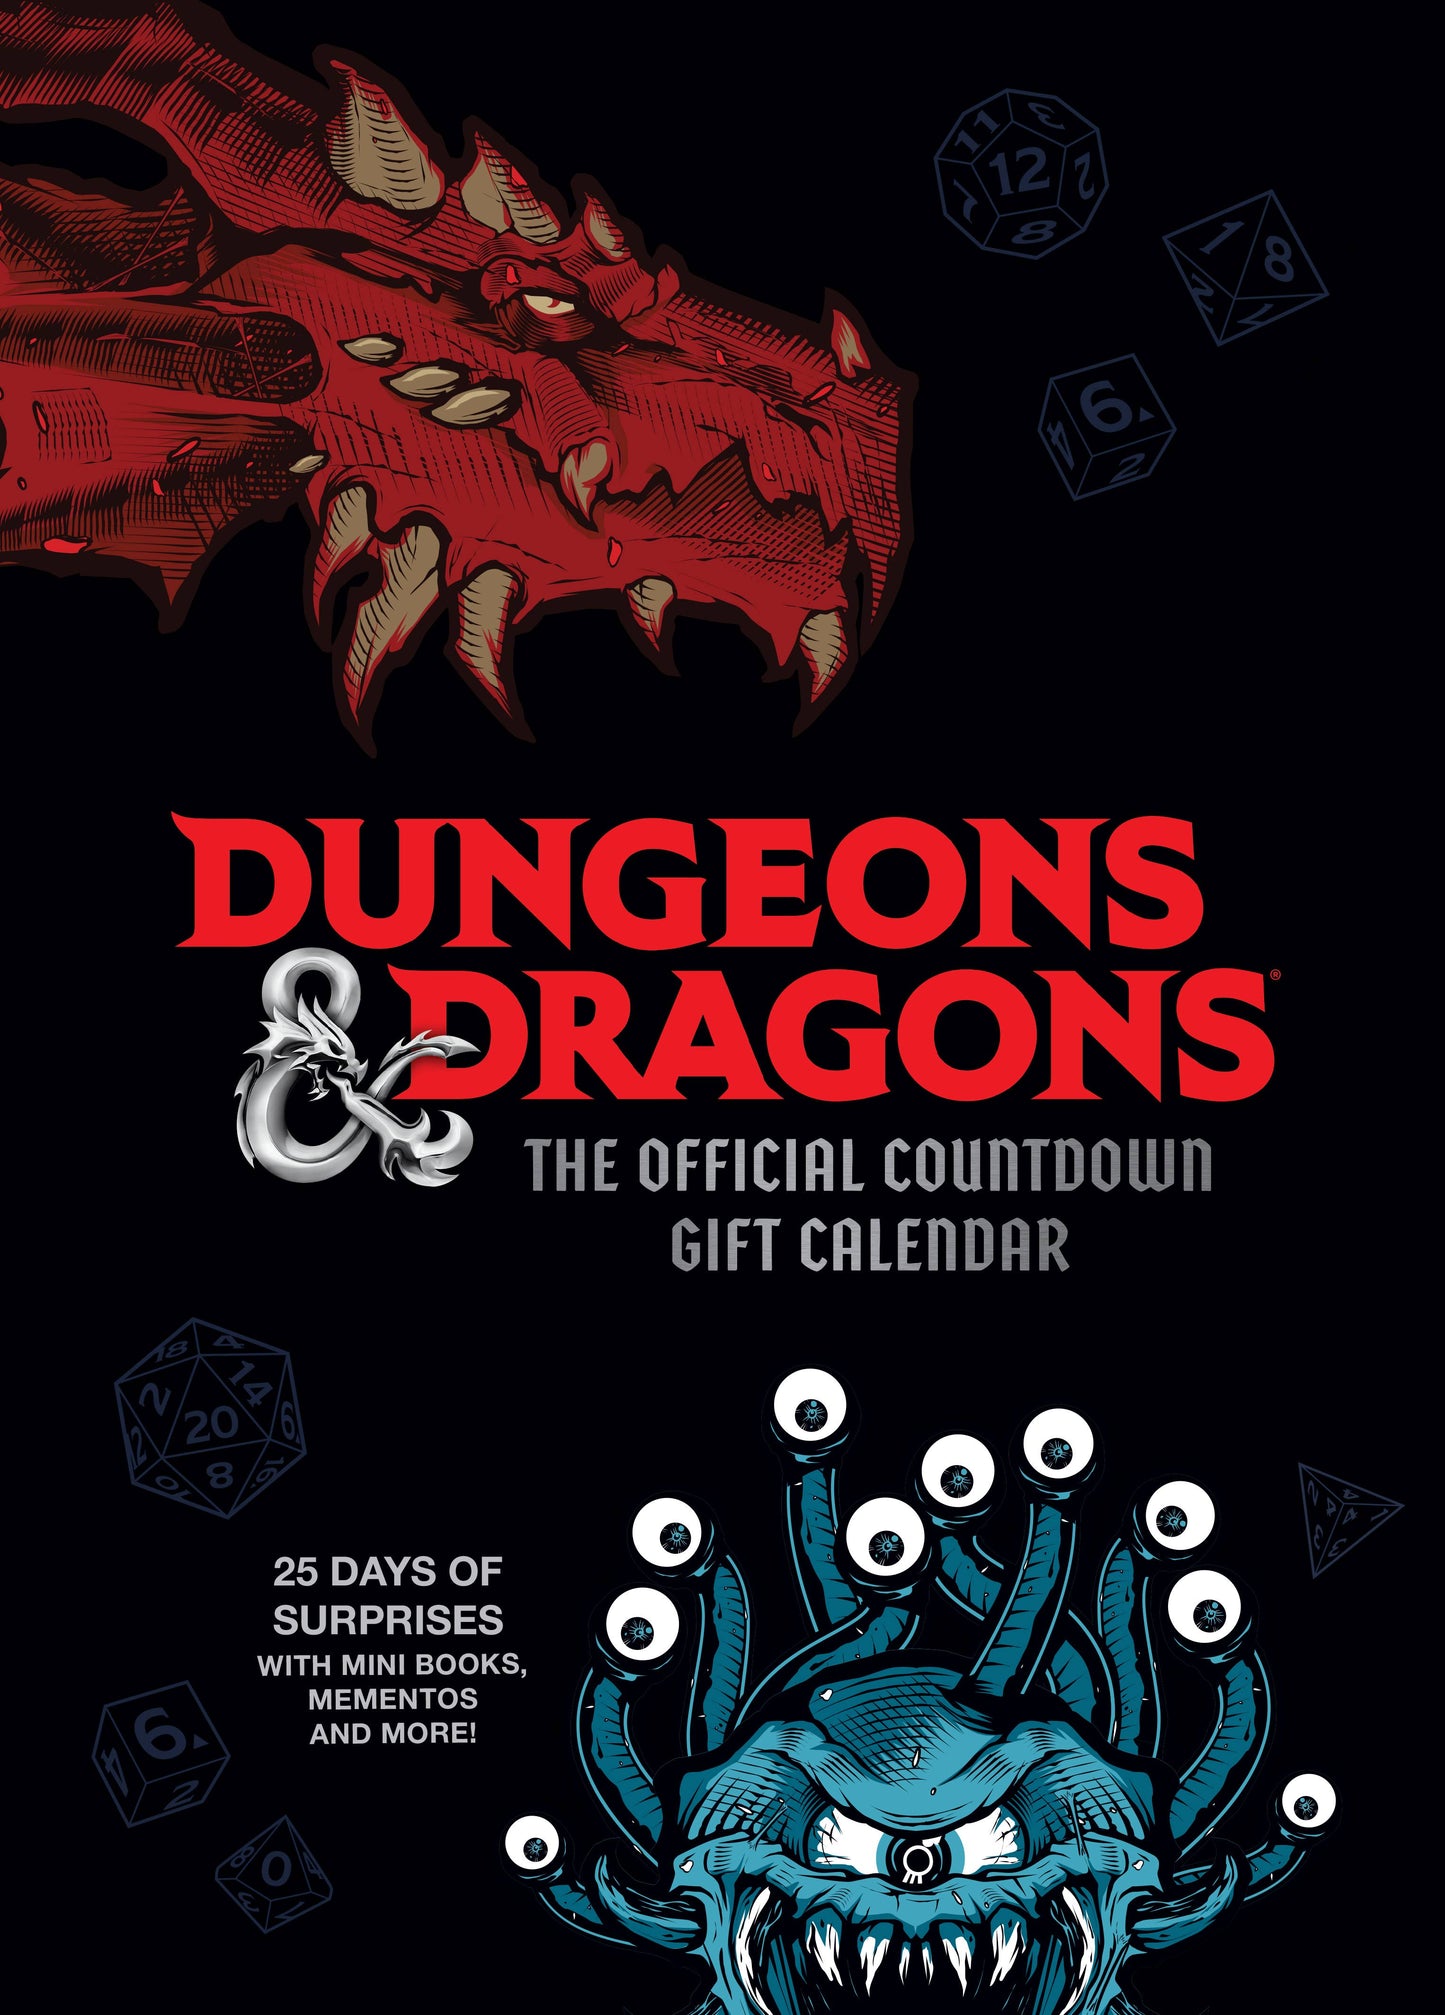 Dungeons & Dragons: The Official Countdown Christmas Advent Gift Calendar Ornaments Stationery